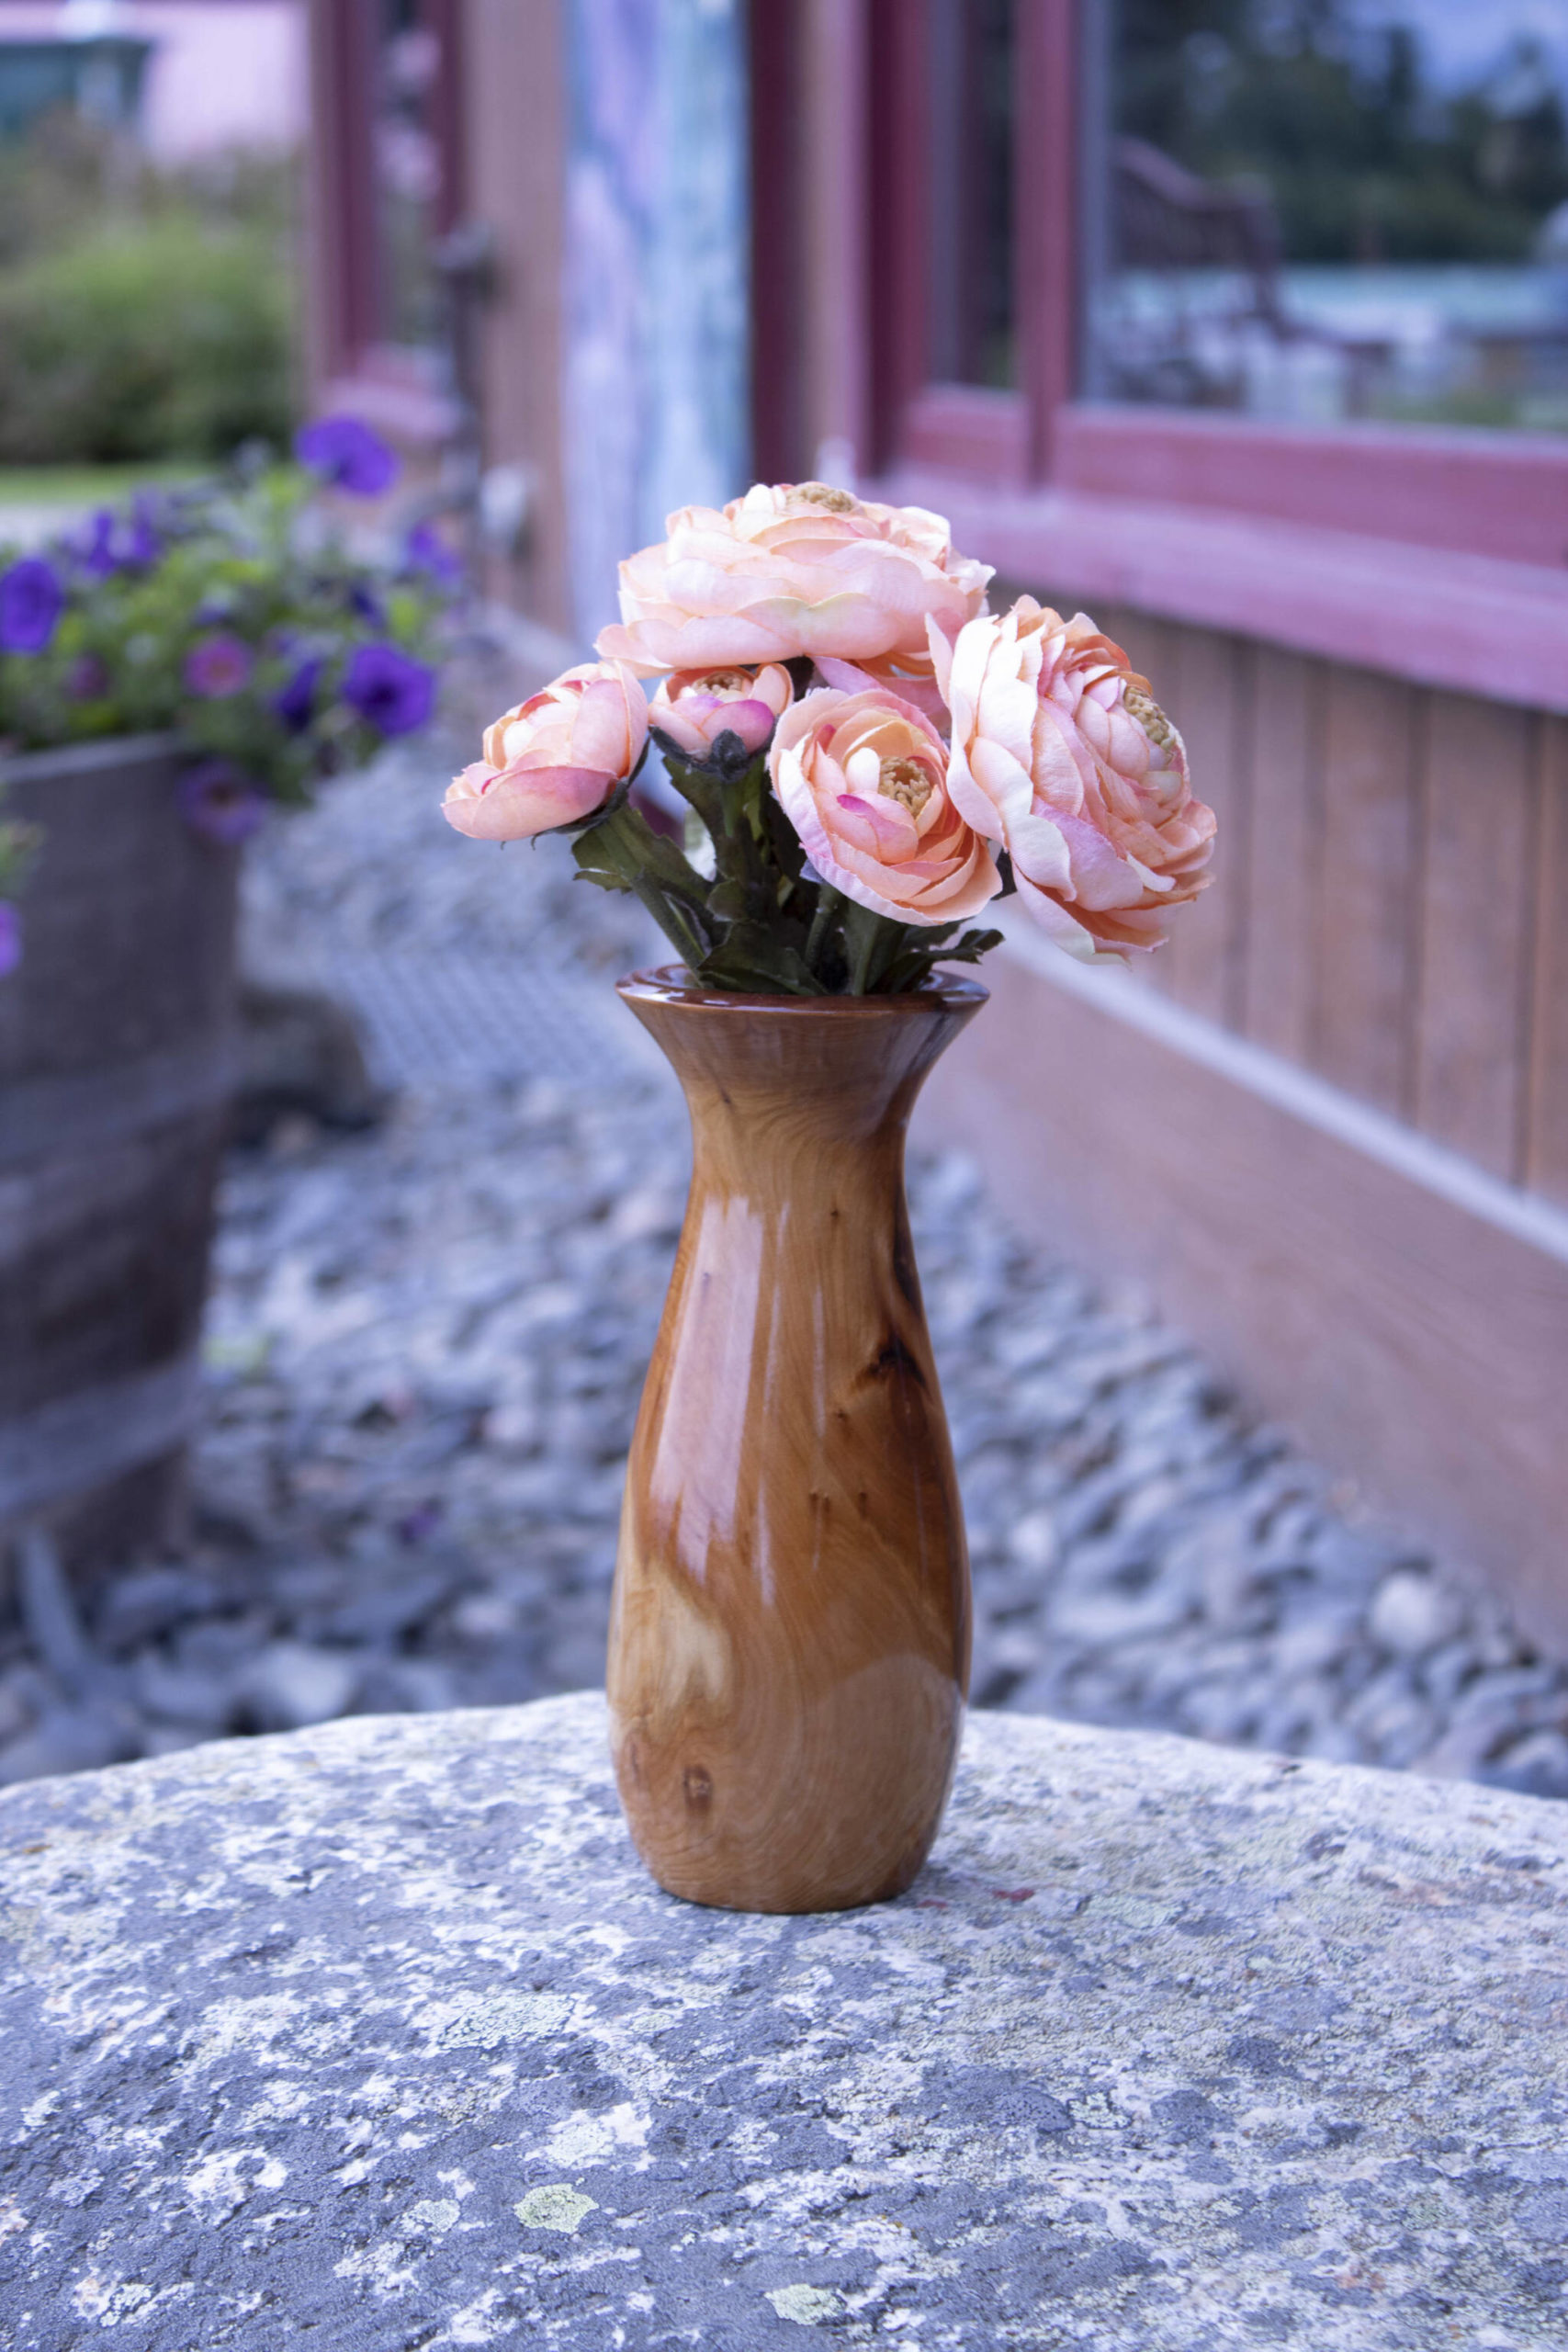 A hand-turned vase by Gerard Garland is on display at the Art Shop Gallery. (Photo provided)